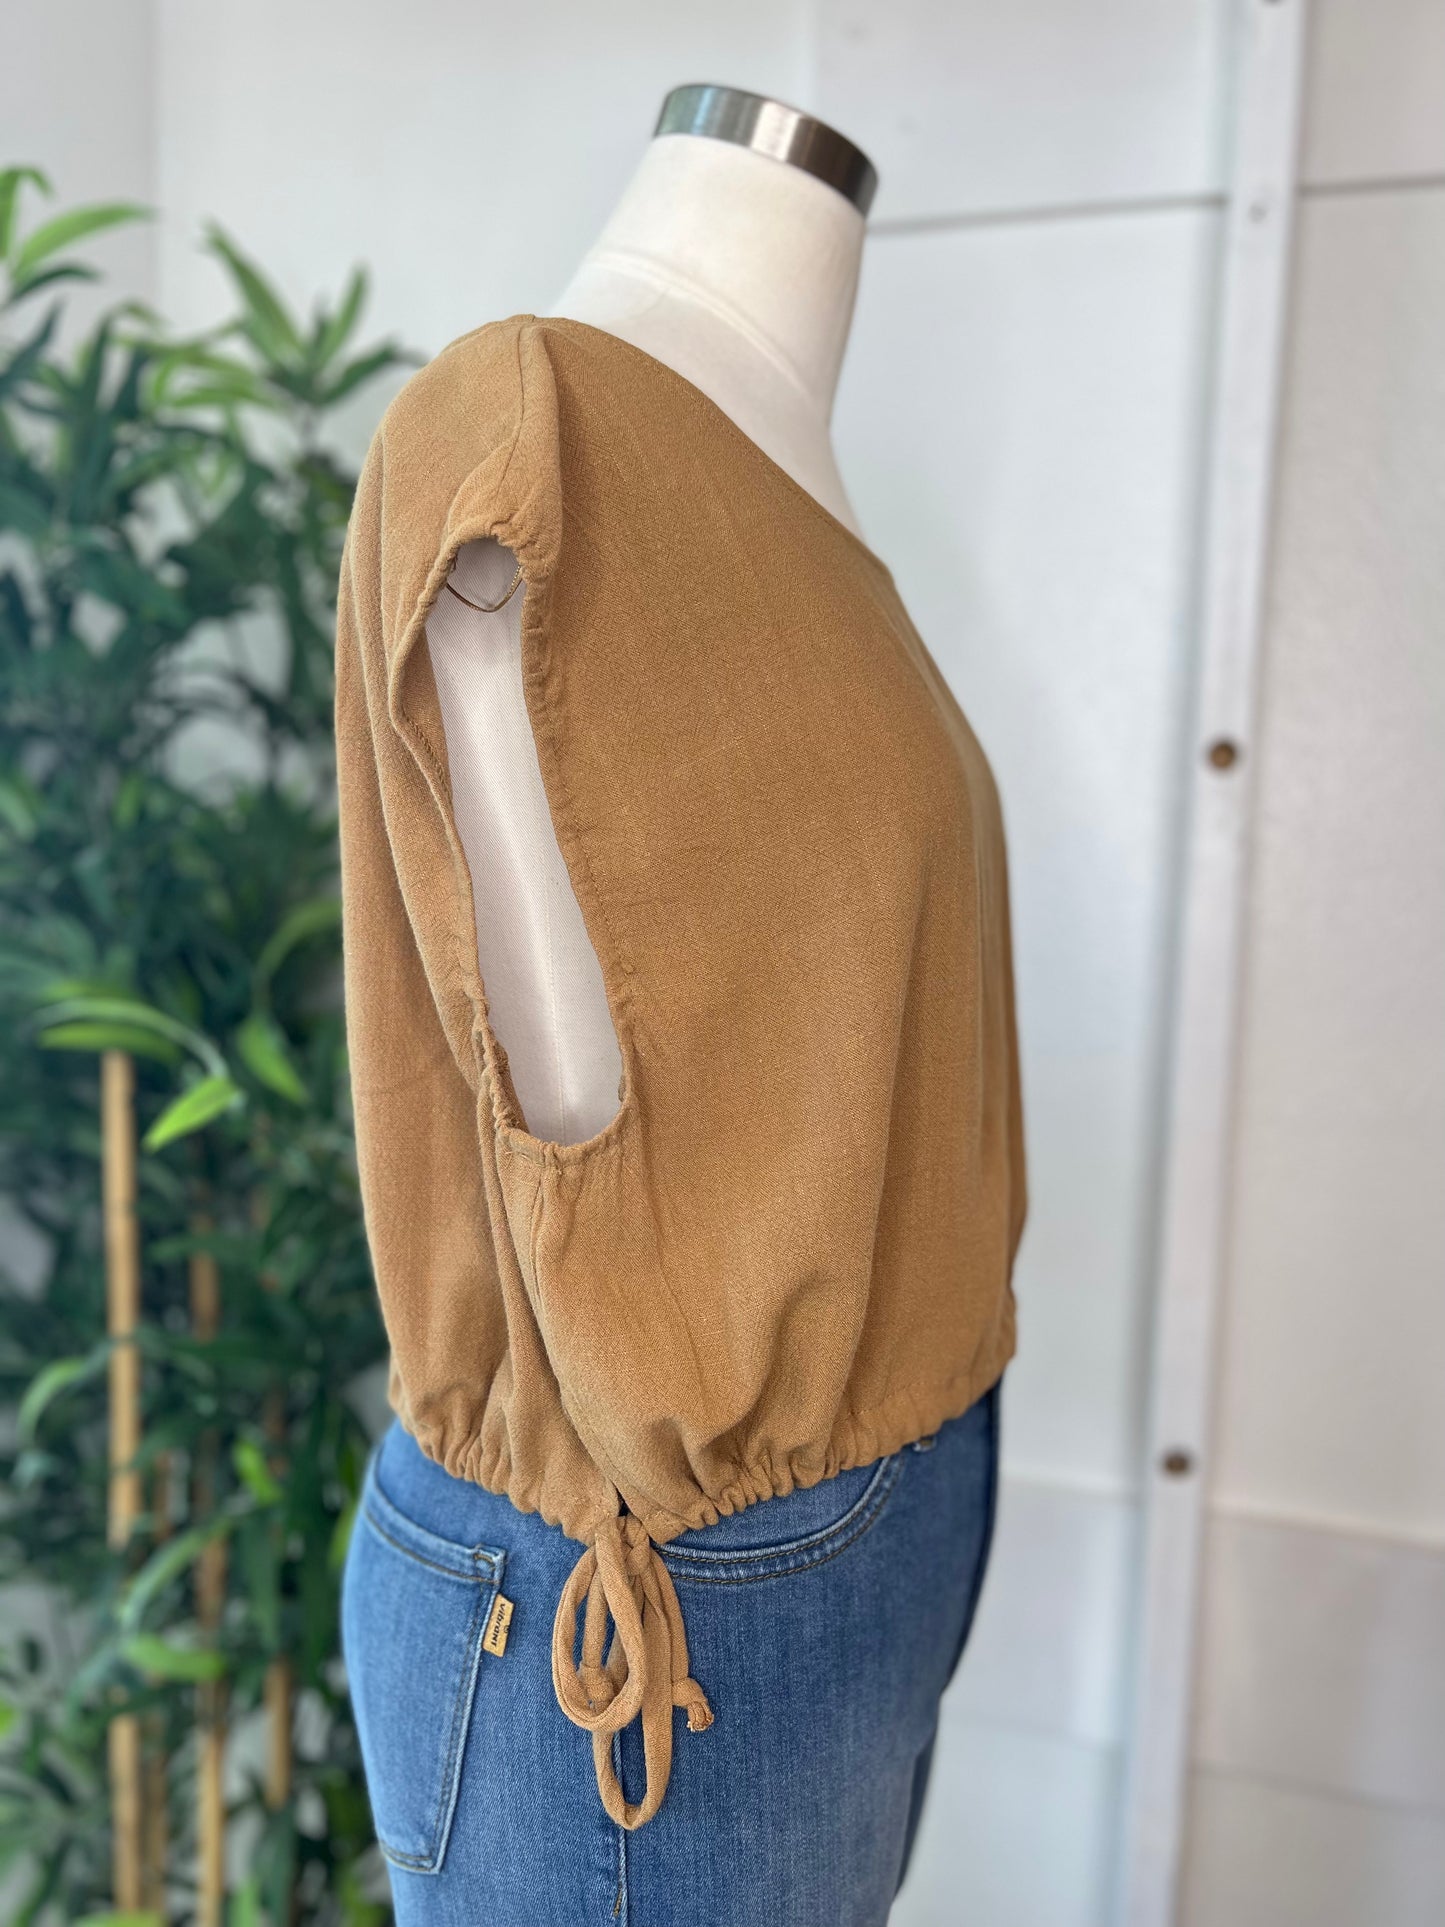 Lust For Linen Brown Top